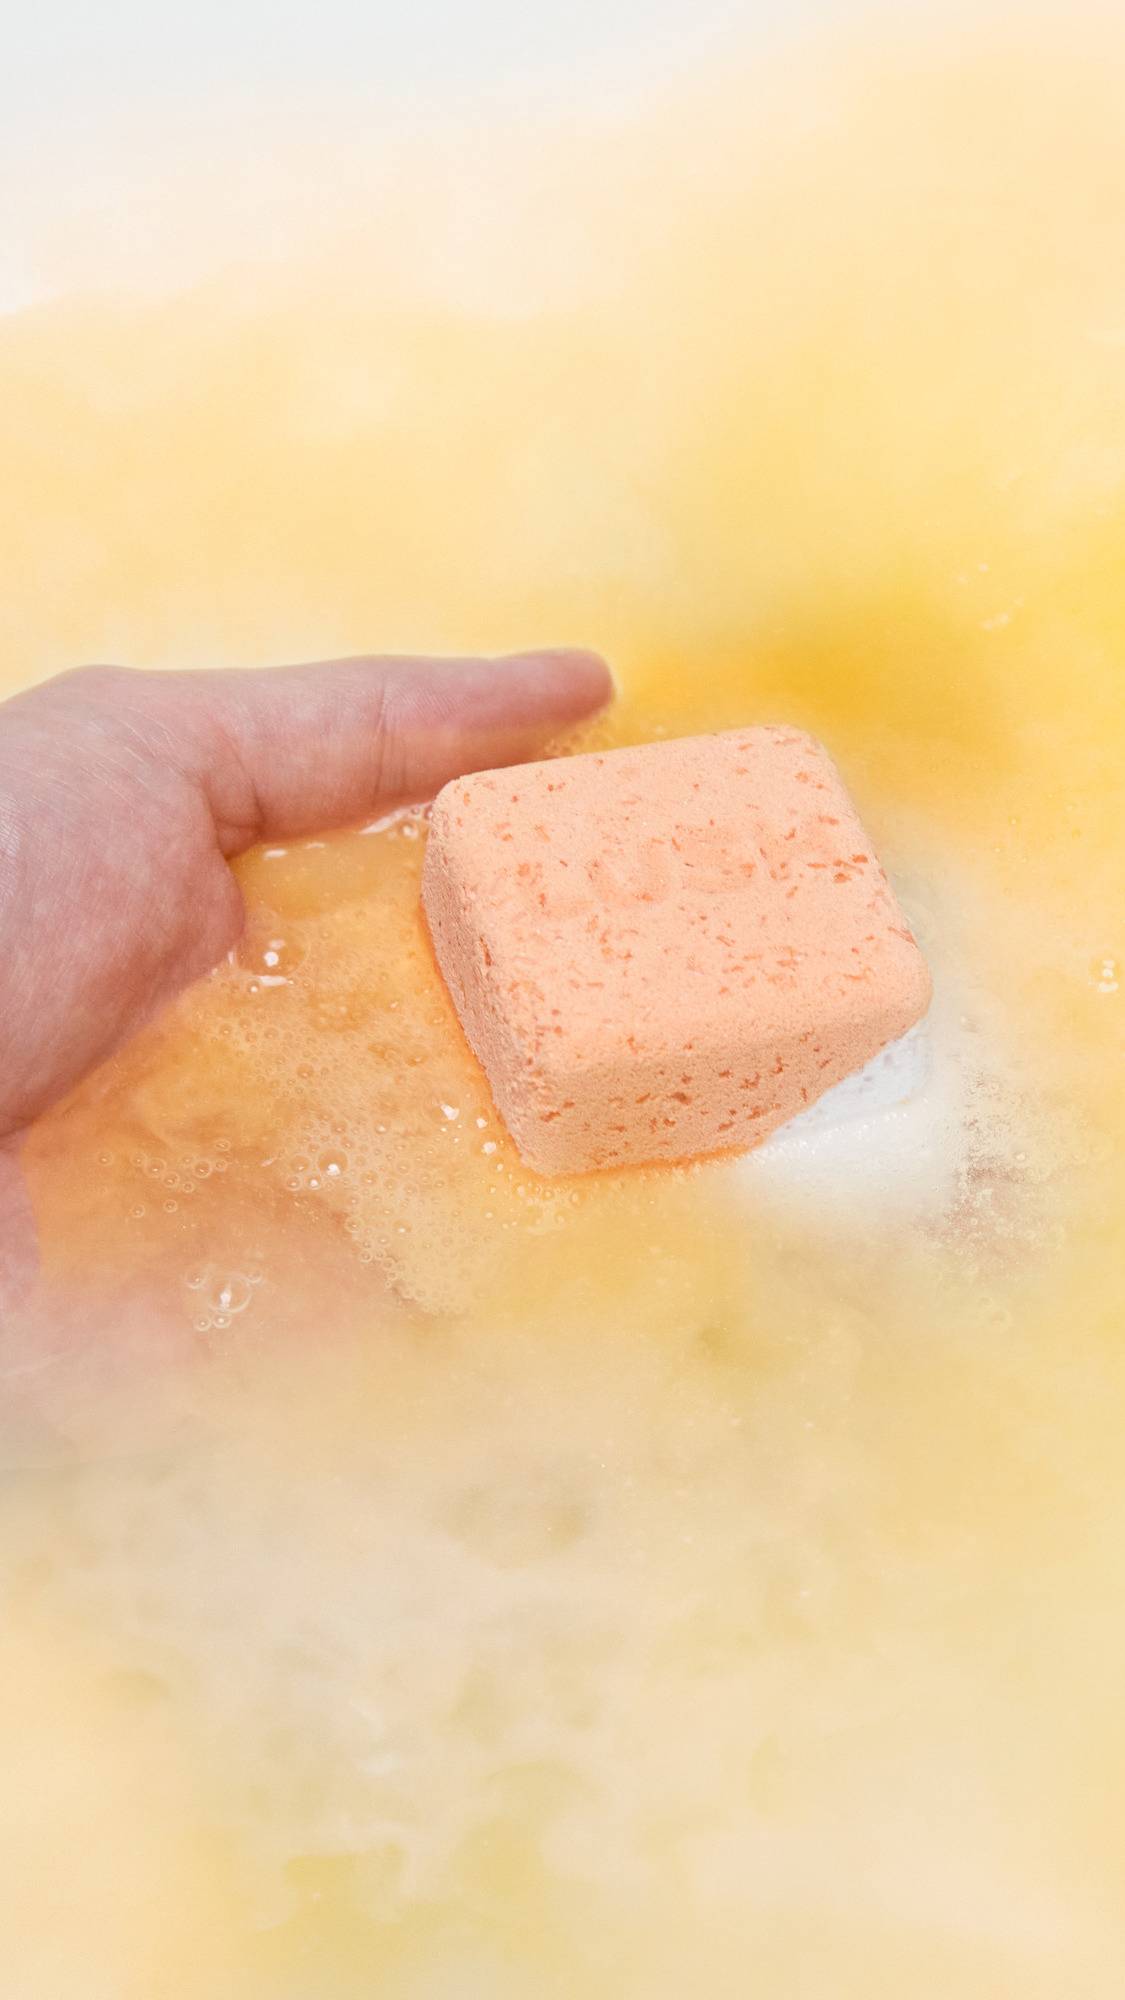 The Cold Water Soother bath bomb is being gently placed into the bath water by hand as it starts dissolving and gives off subtle, peachy foam. 